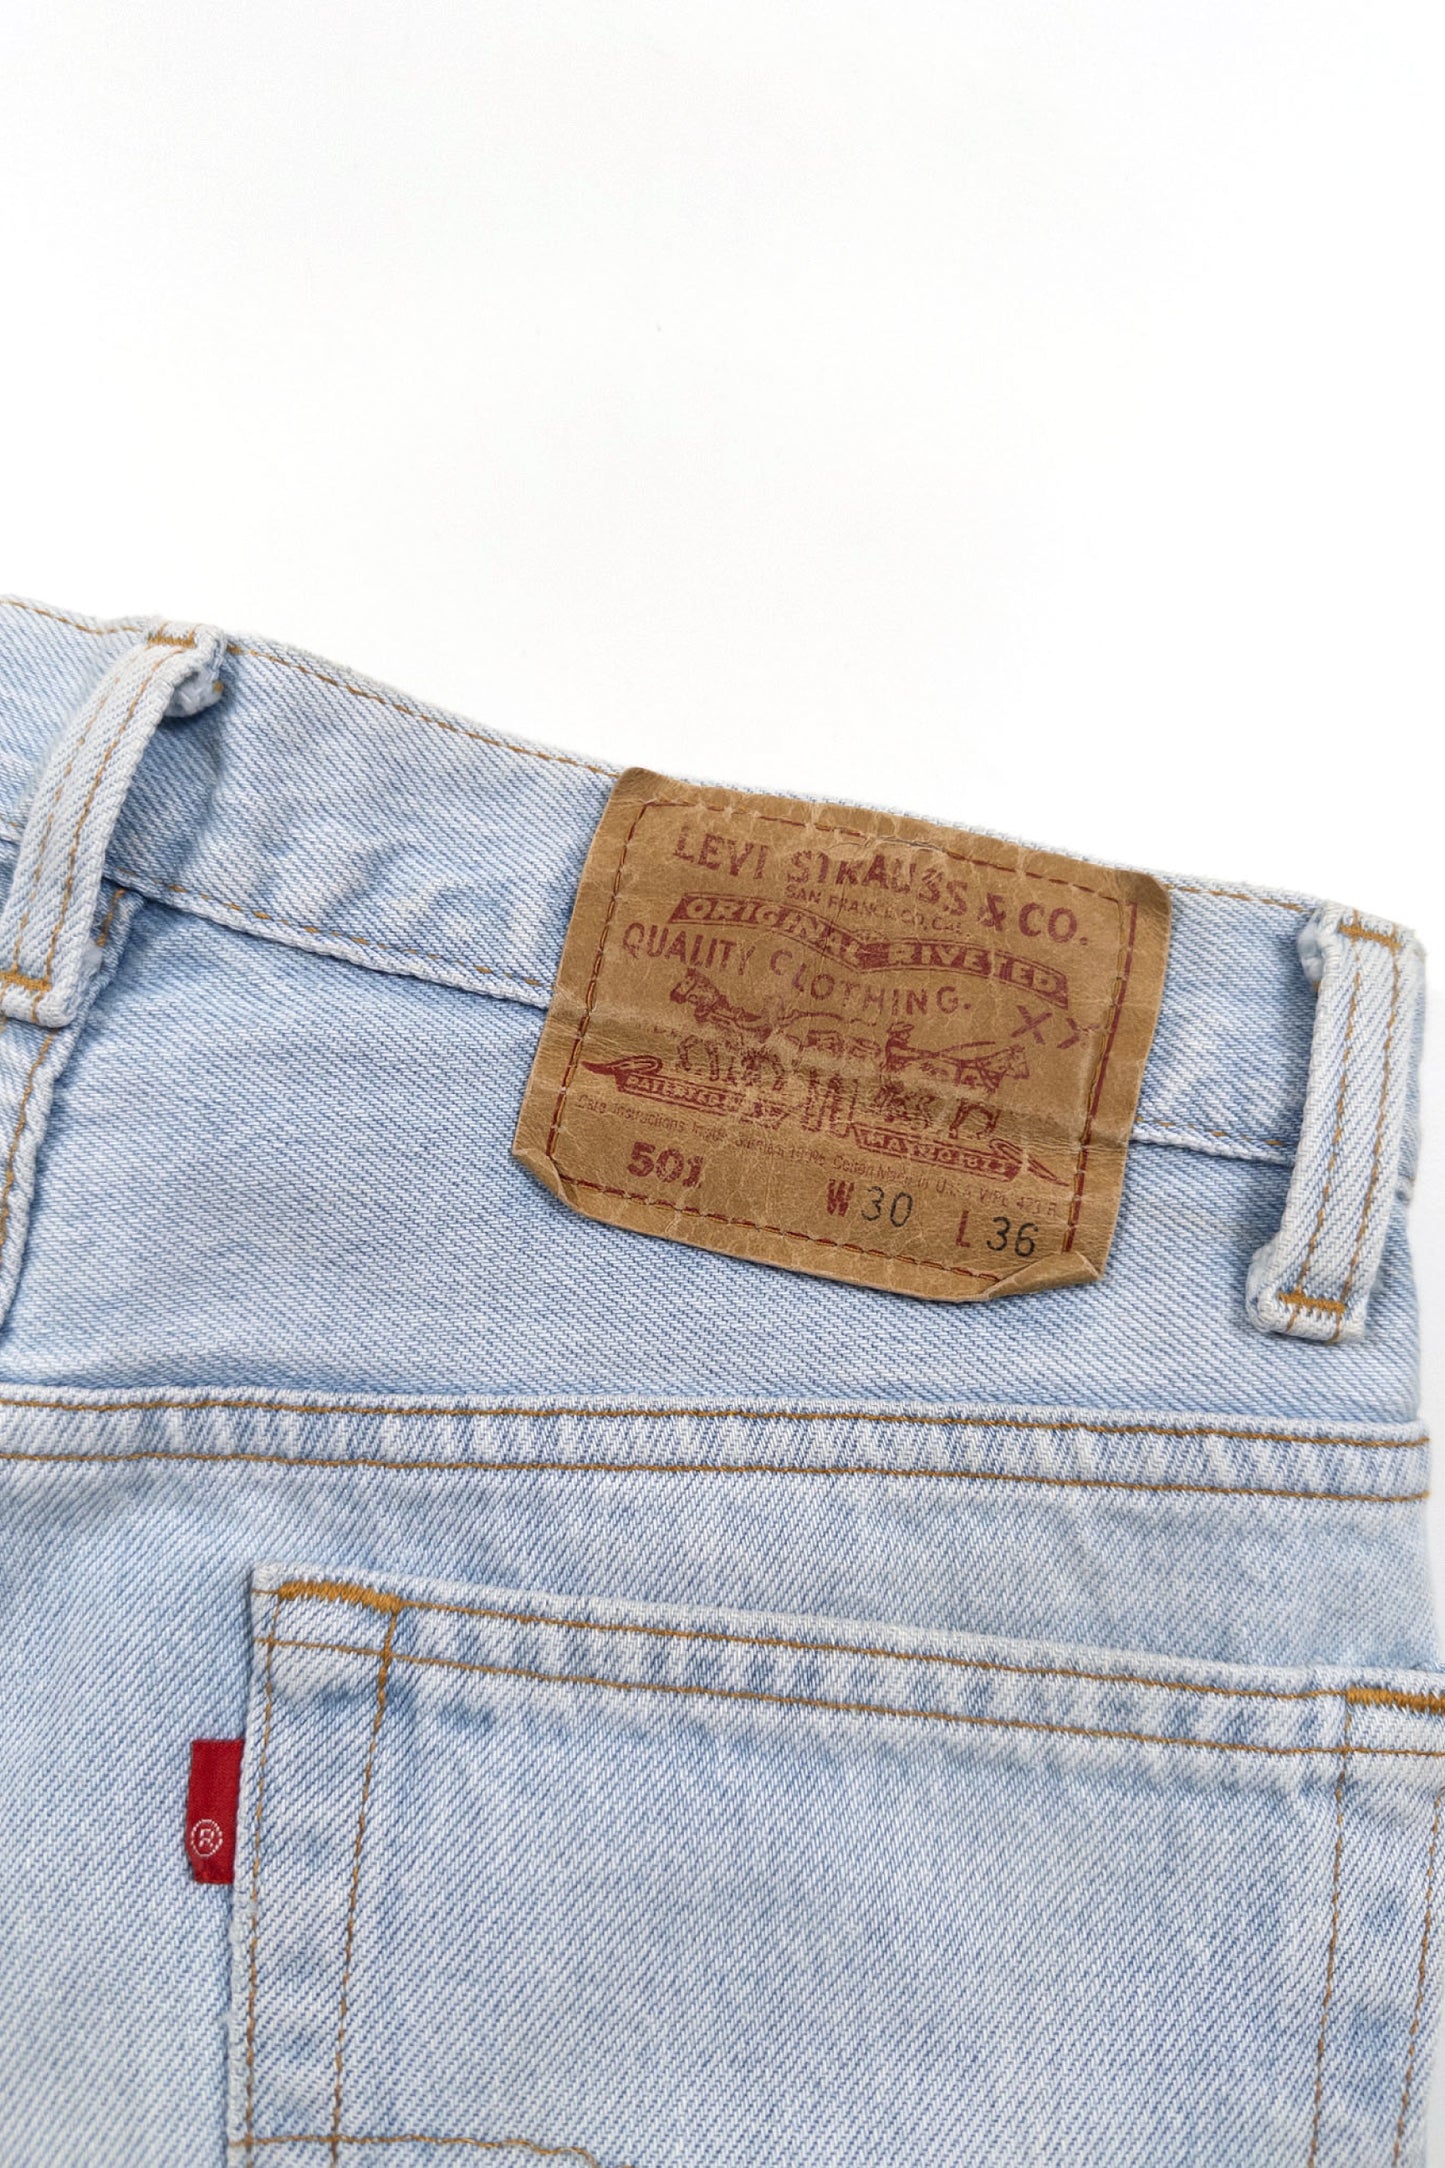 90's Made in USA Levi's 501 denim pants